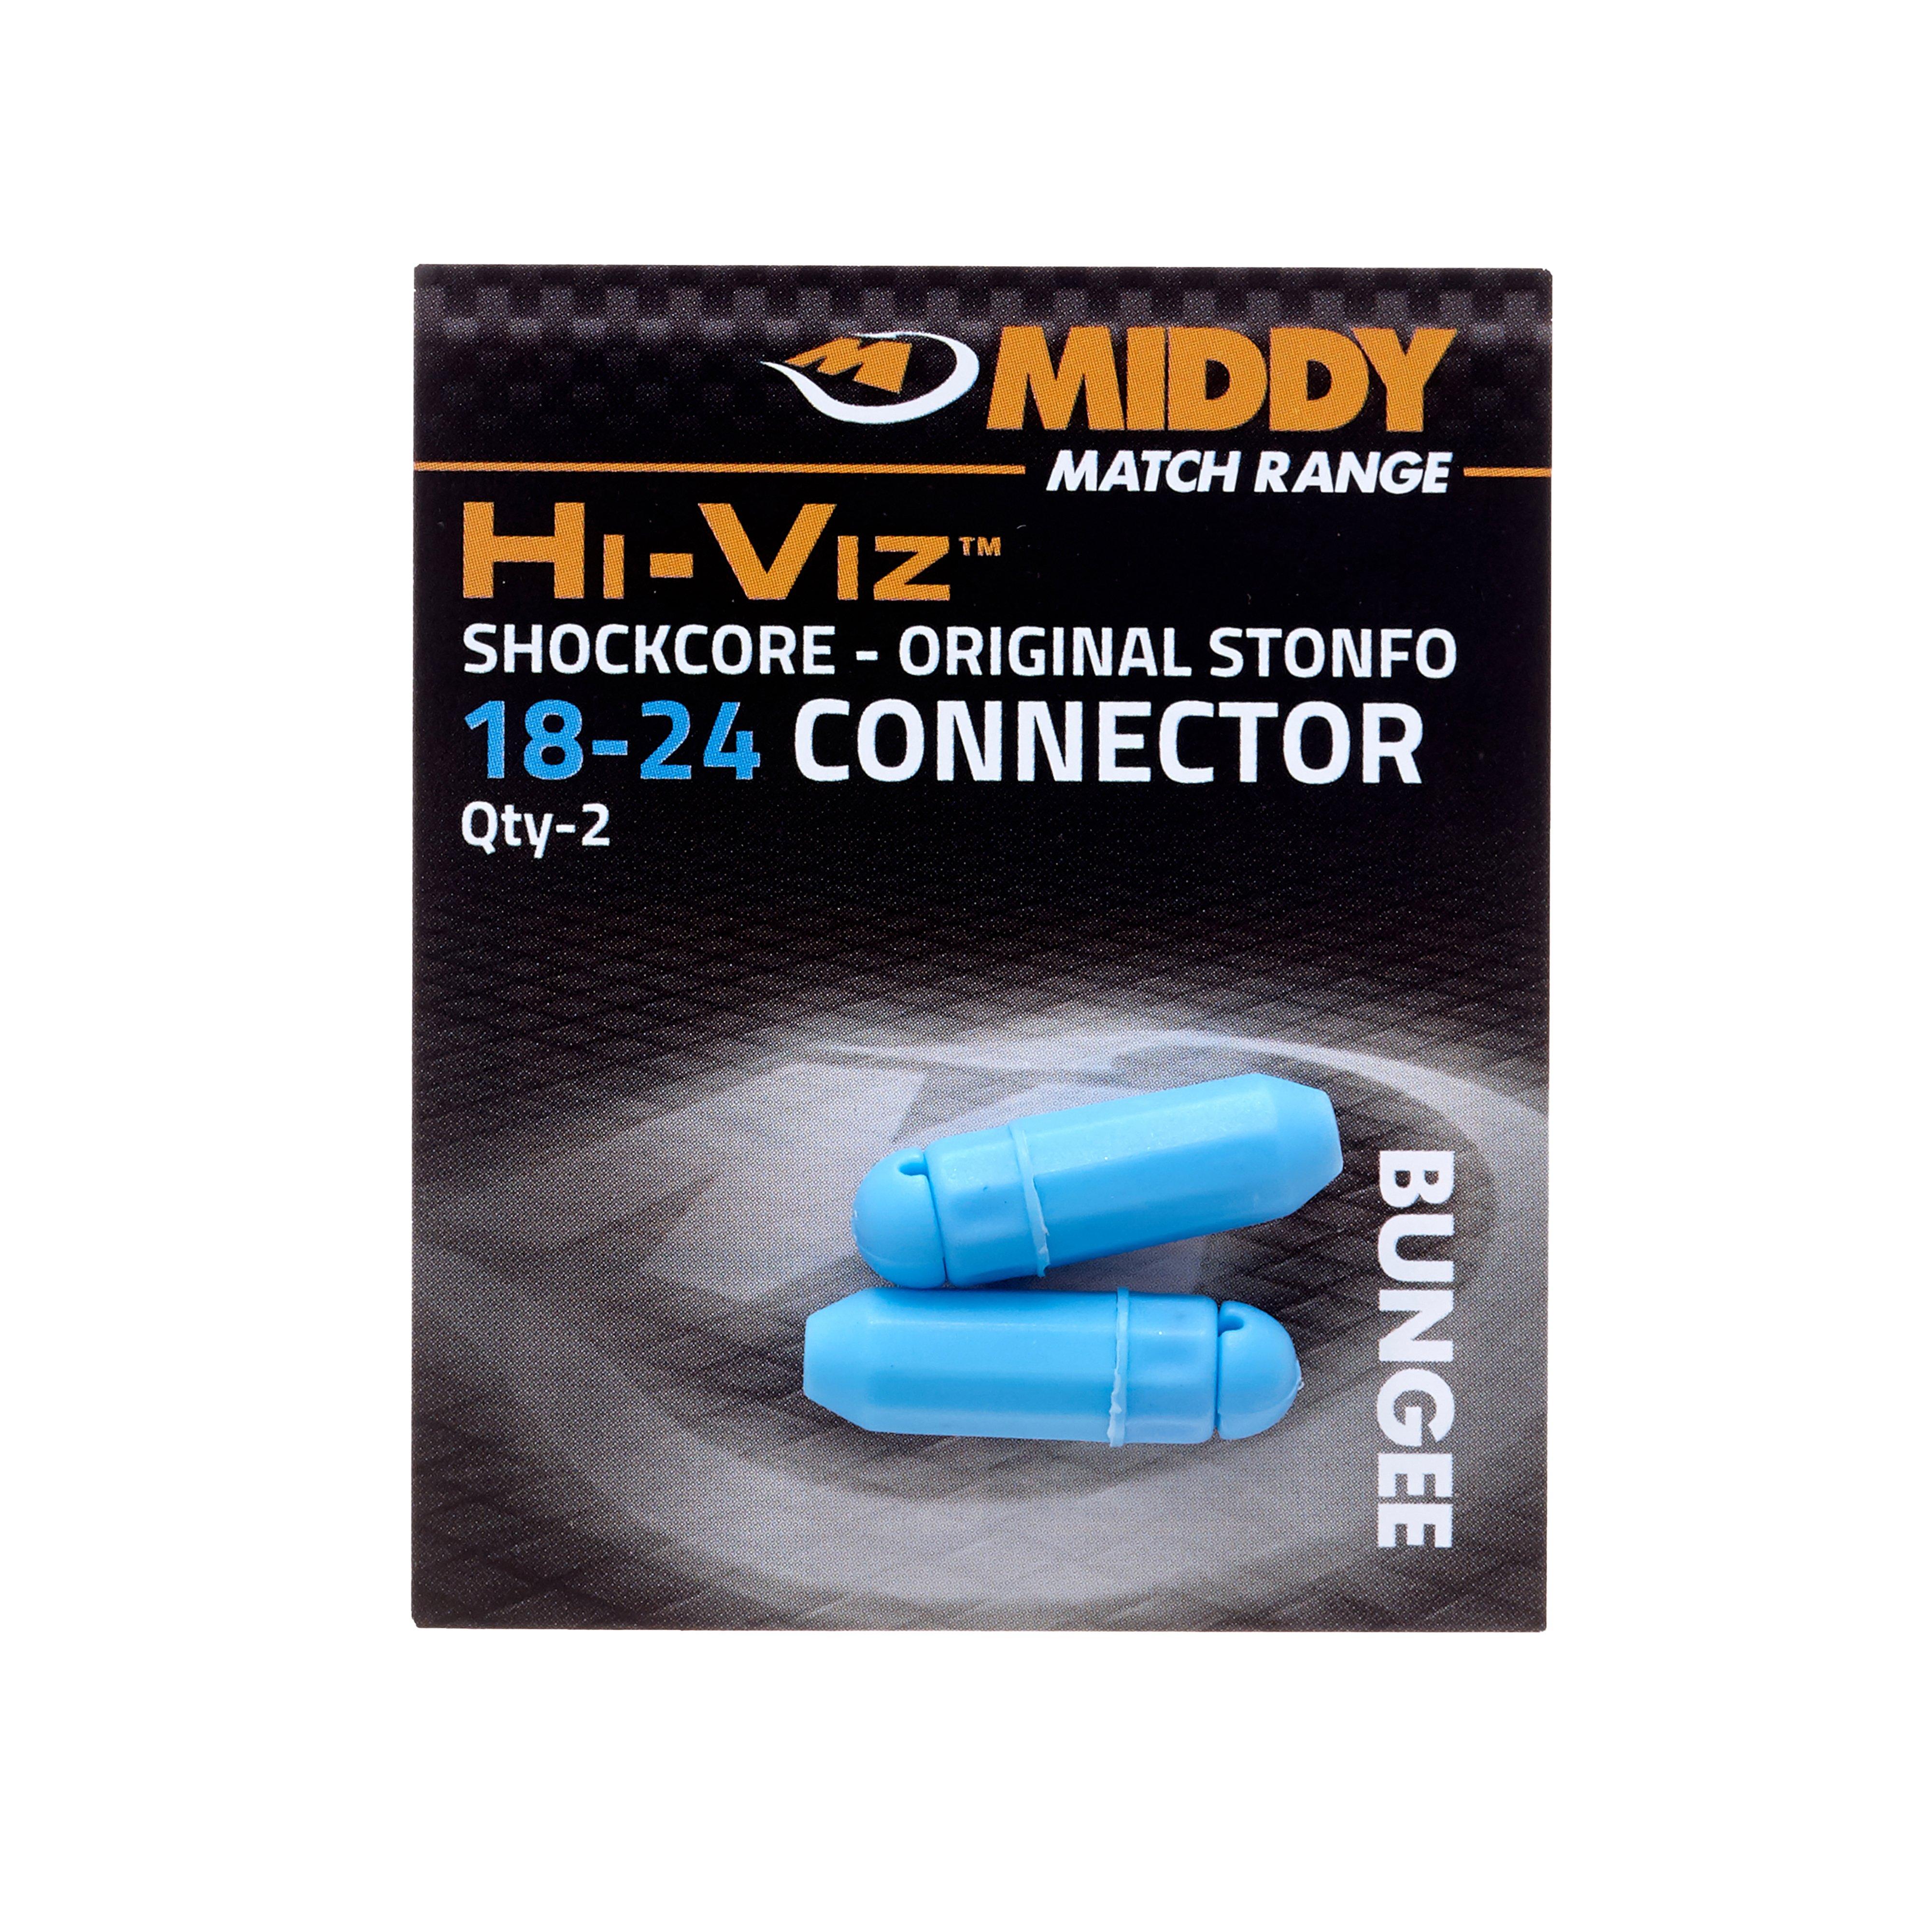 Middy 18-24 Bungee Connector Review